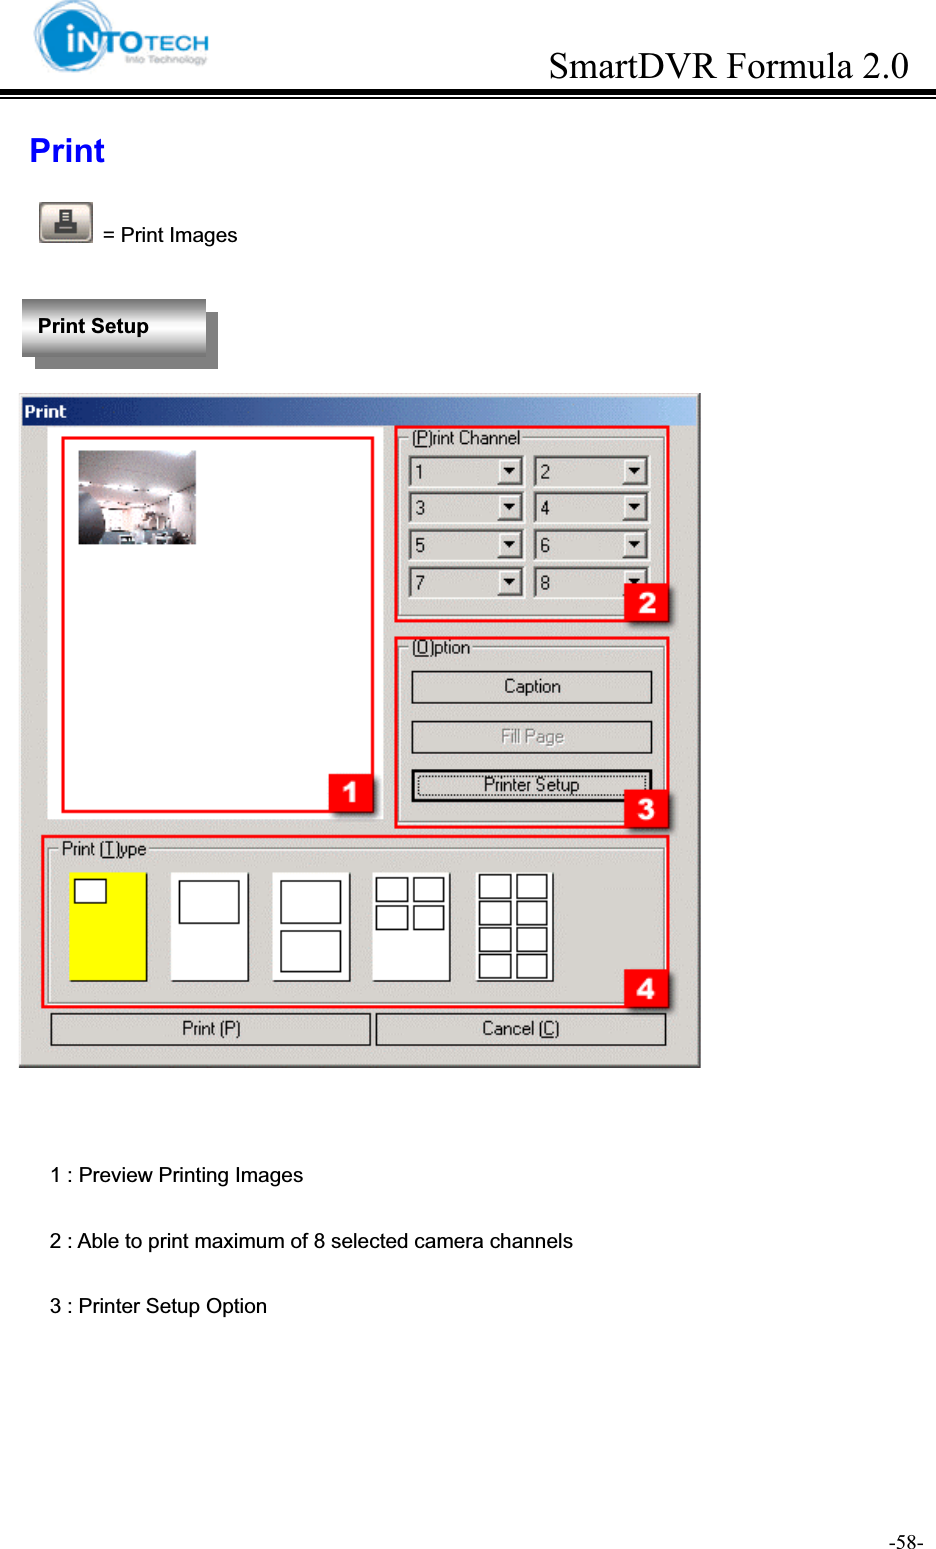 GGGGGGGGGGGGGGGGGGGGGGGGGGGGGGGSmartDVR Formula 2.0G                                                                               -58-GPrint  = Print Images       1 : Preview Printing Images       2 : Able to print maximum of 8 selected camera channels       3 : Printer Setup Option Print SetupG